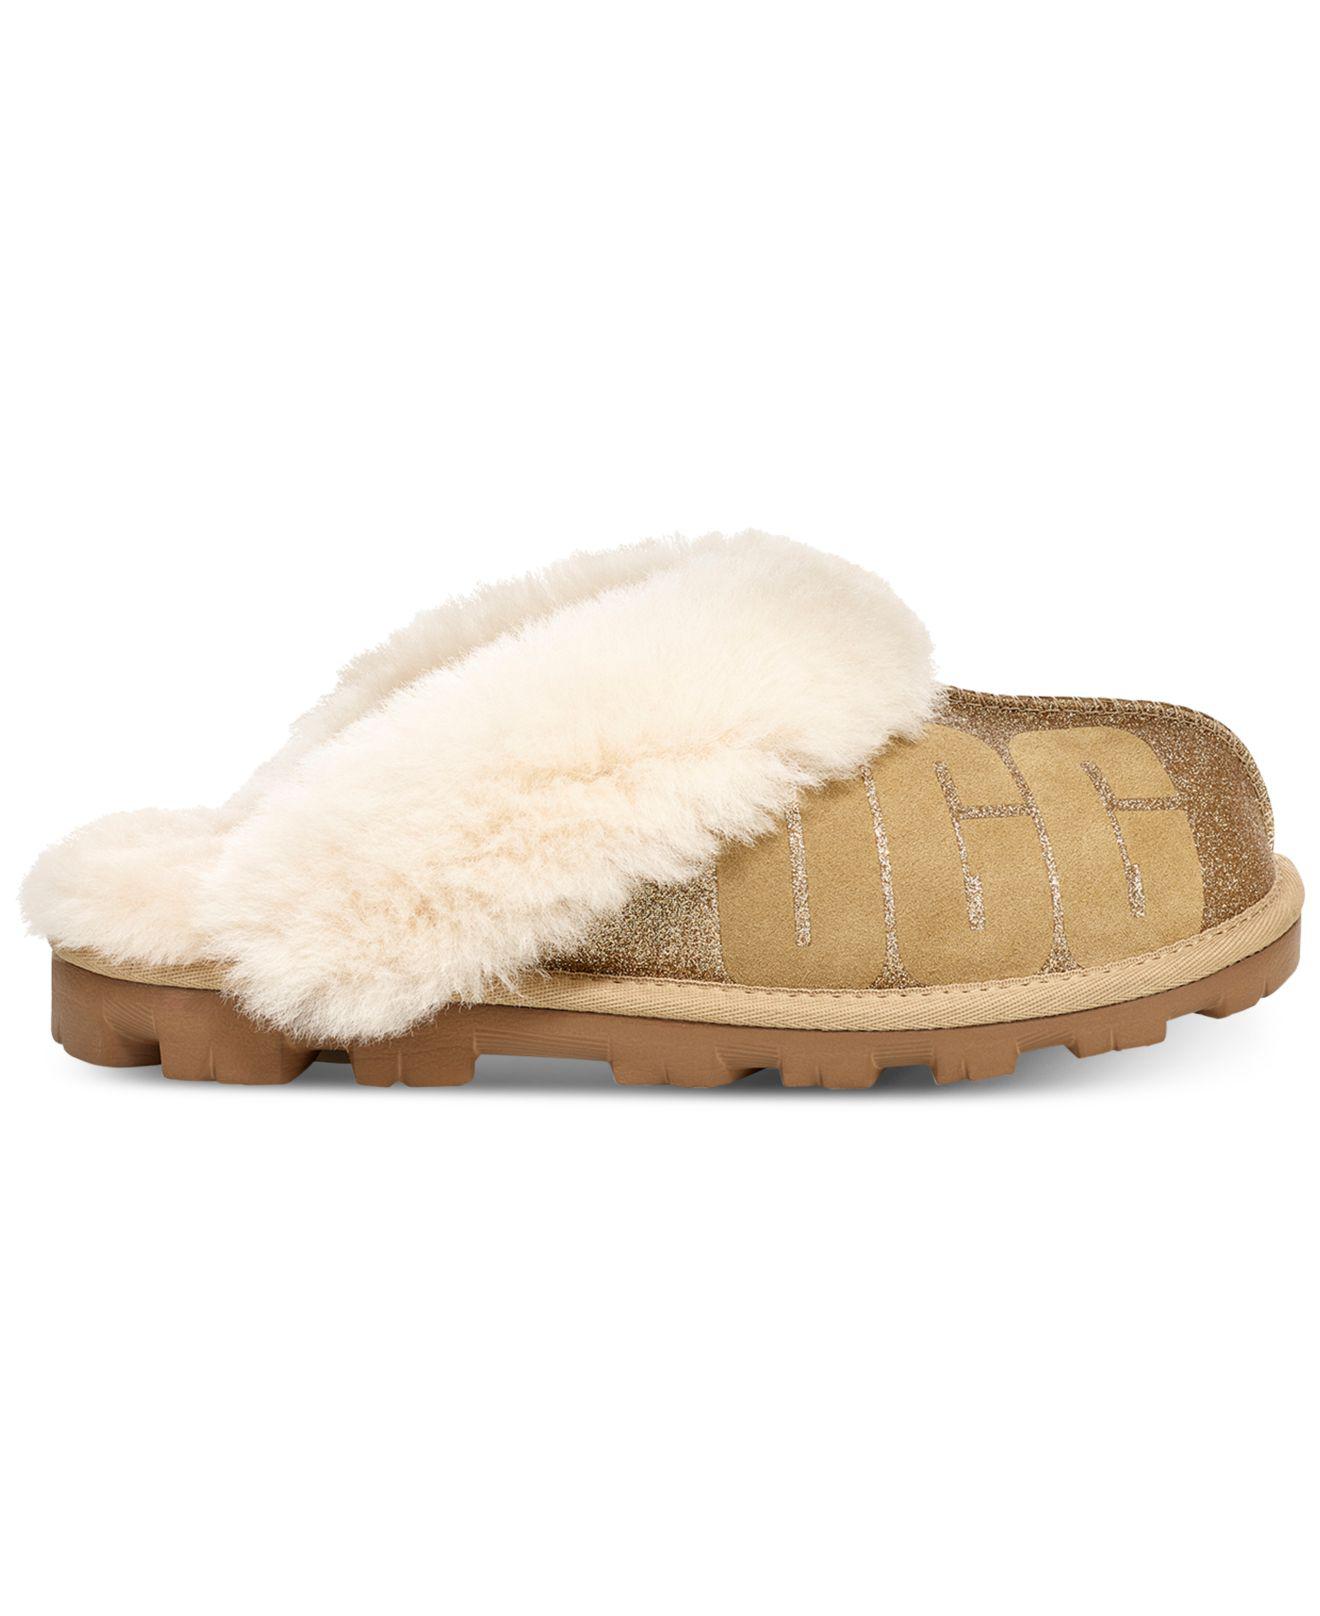 UGG Fur Coquette Sparkle Slippers in Gold (Metallic) - Lyst